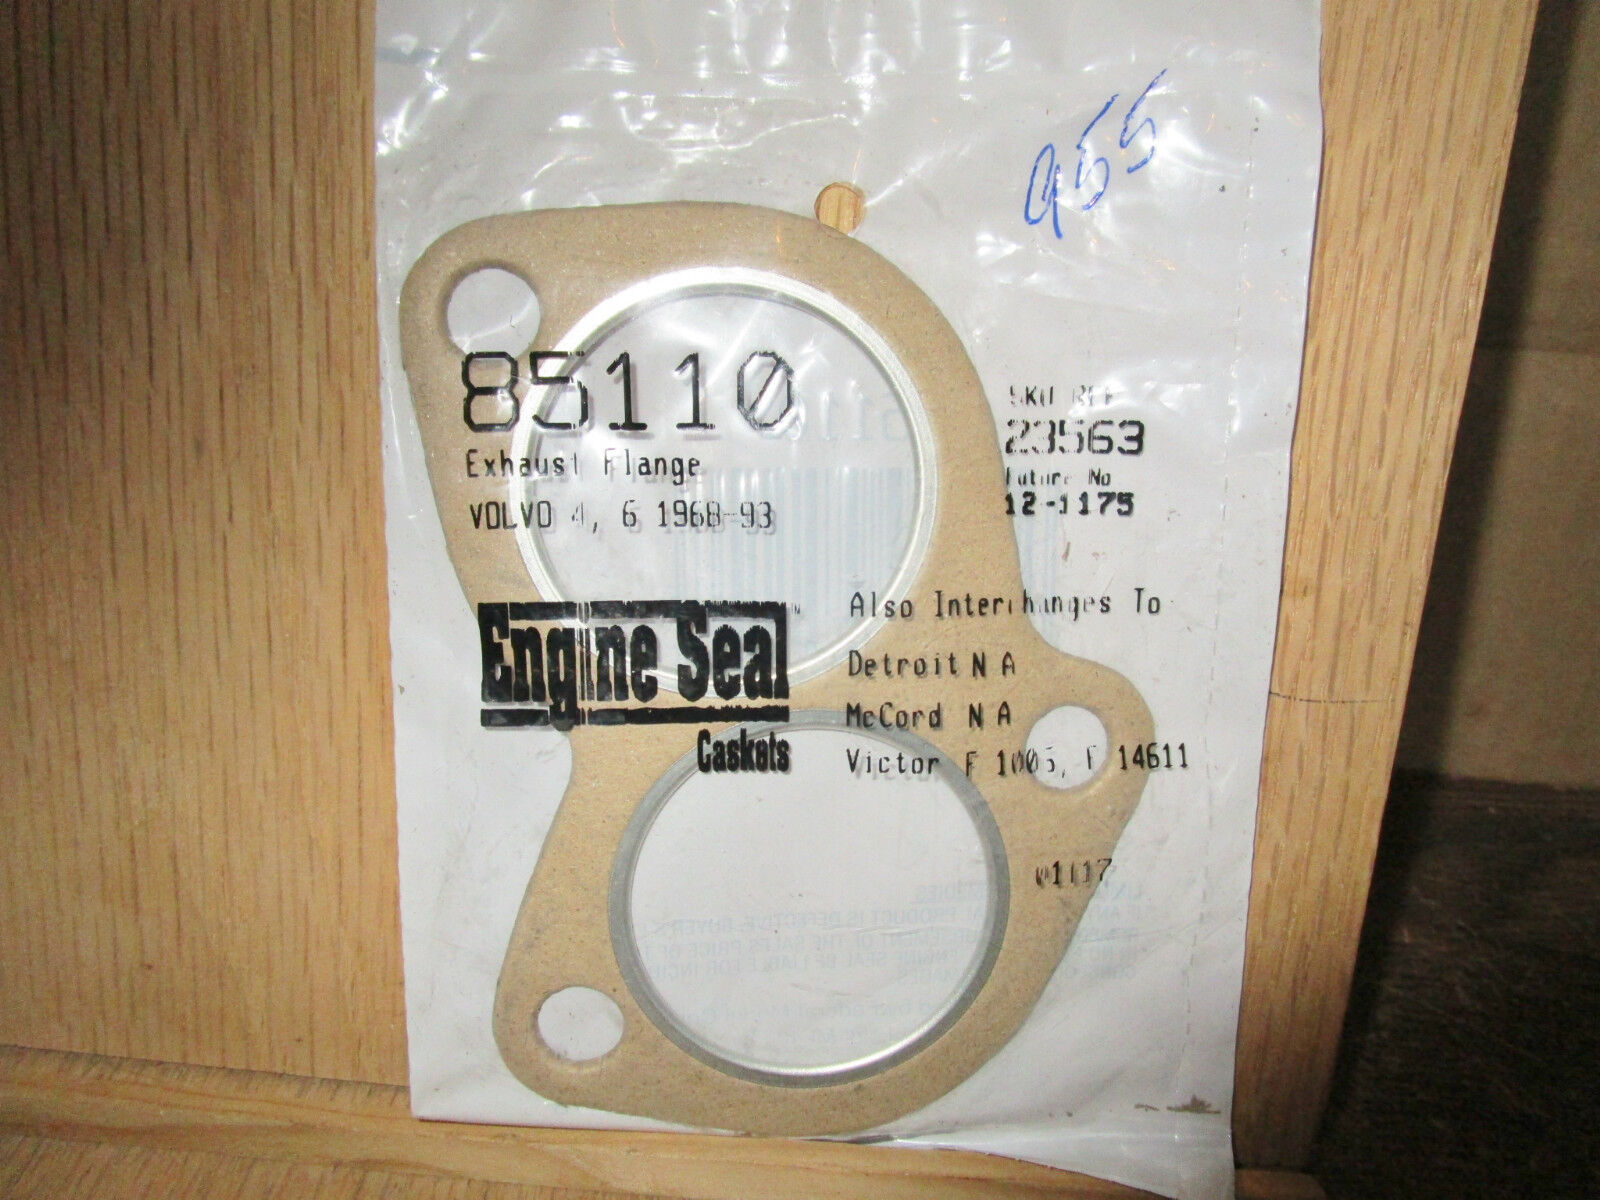 Engine Seal 85110 Exhaust Flange Gasket  Volvo 4 6 1968-93 SELLING 1 LOT OF 12